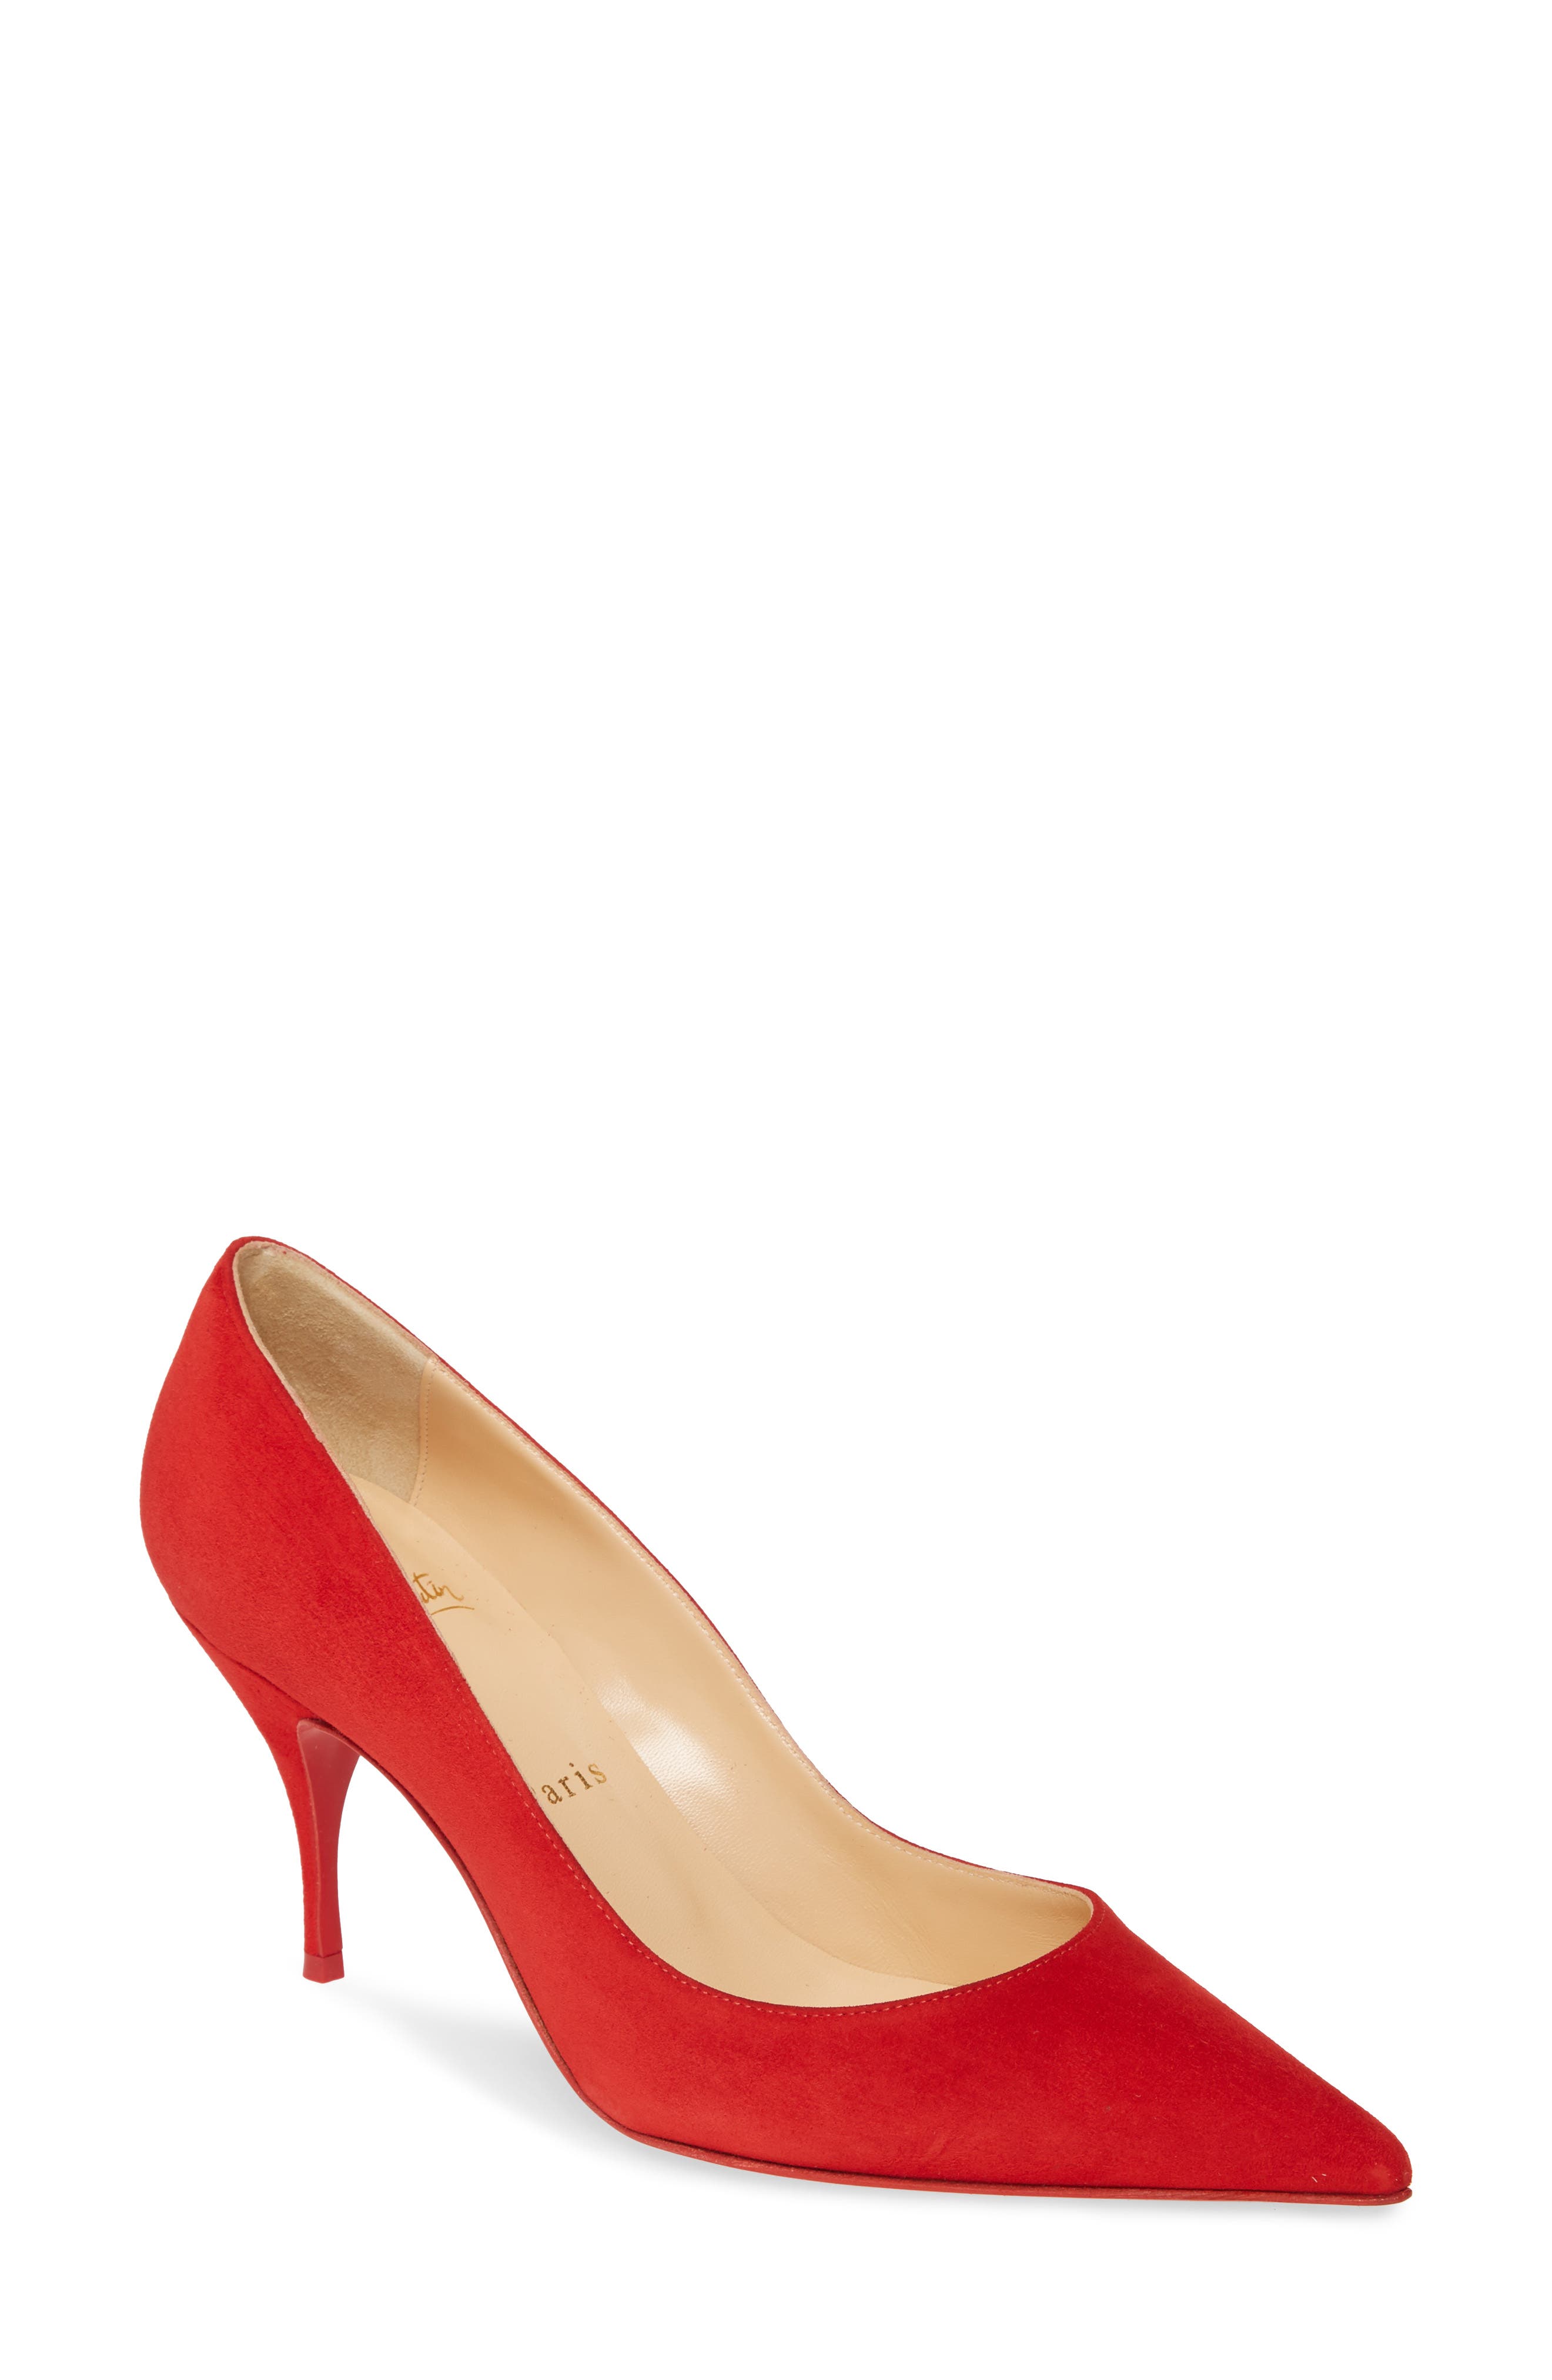 red louboutin pumps